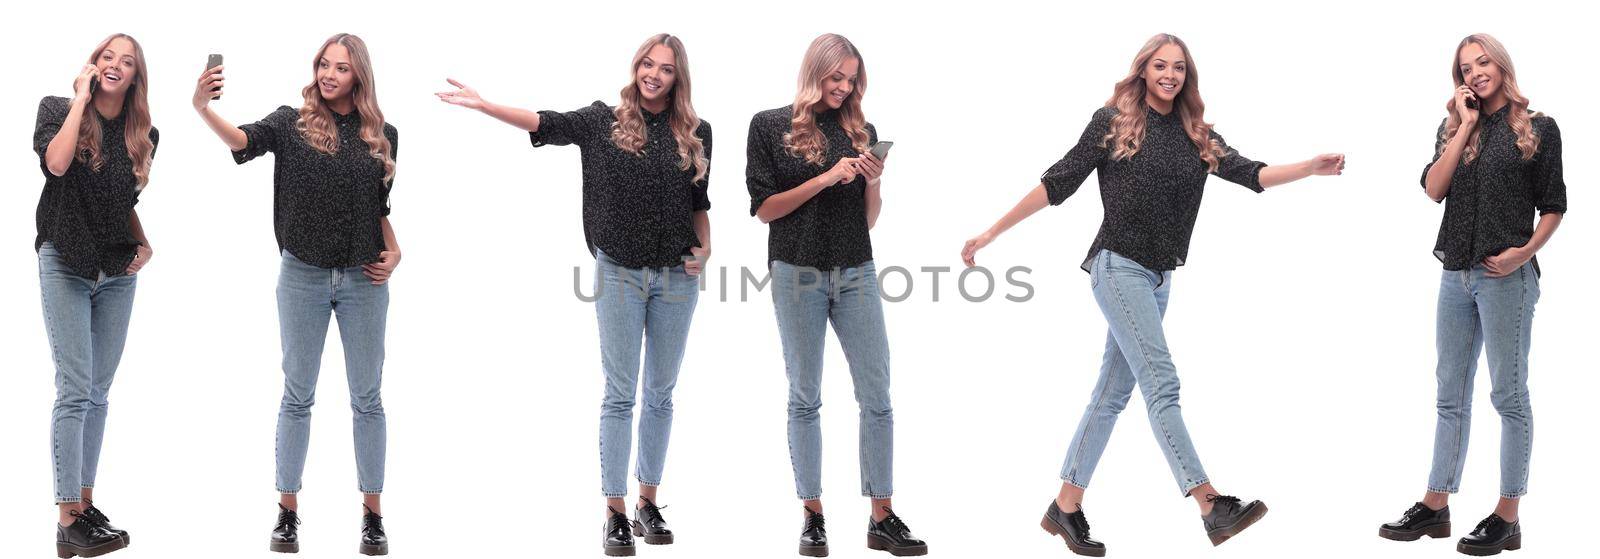 collage of photos of a cute young woman. isolated on a white background